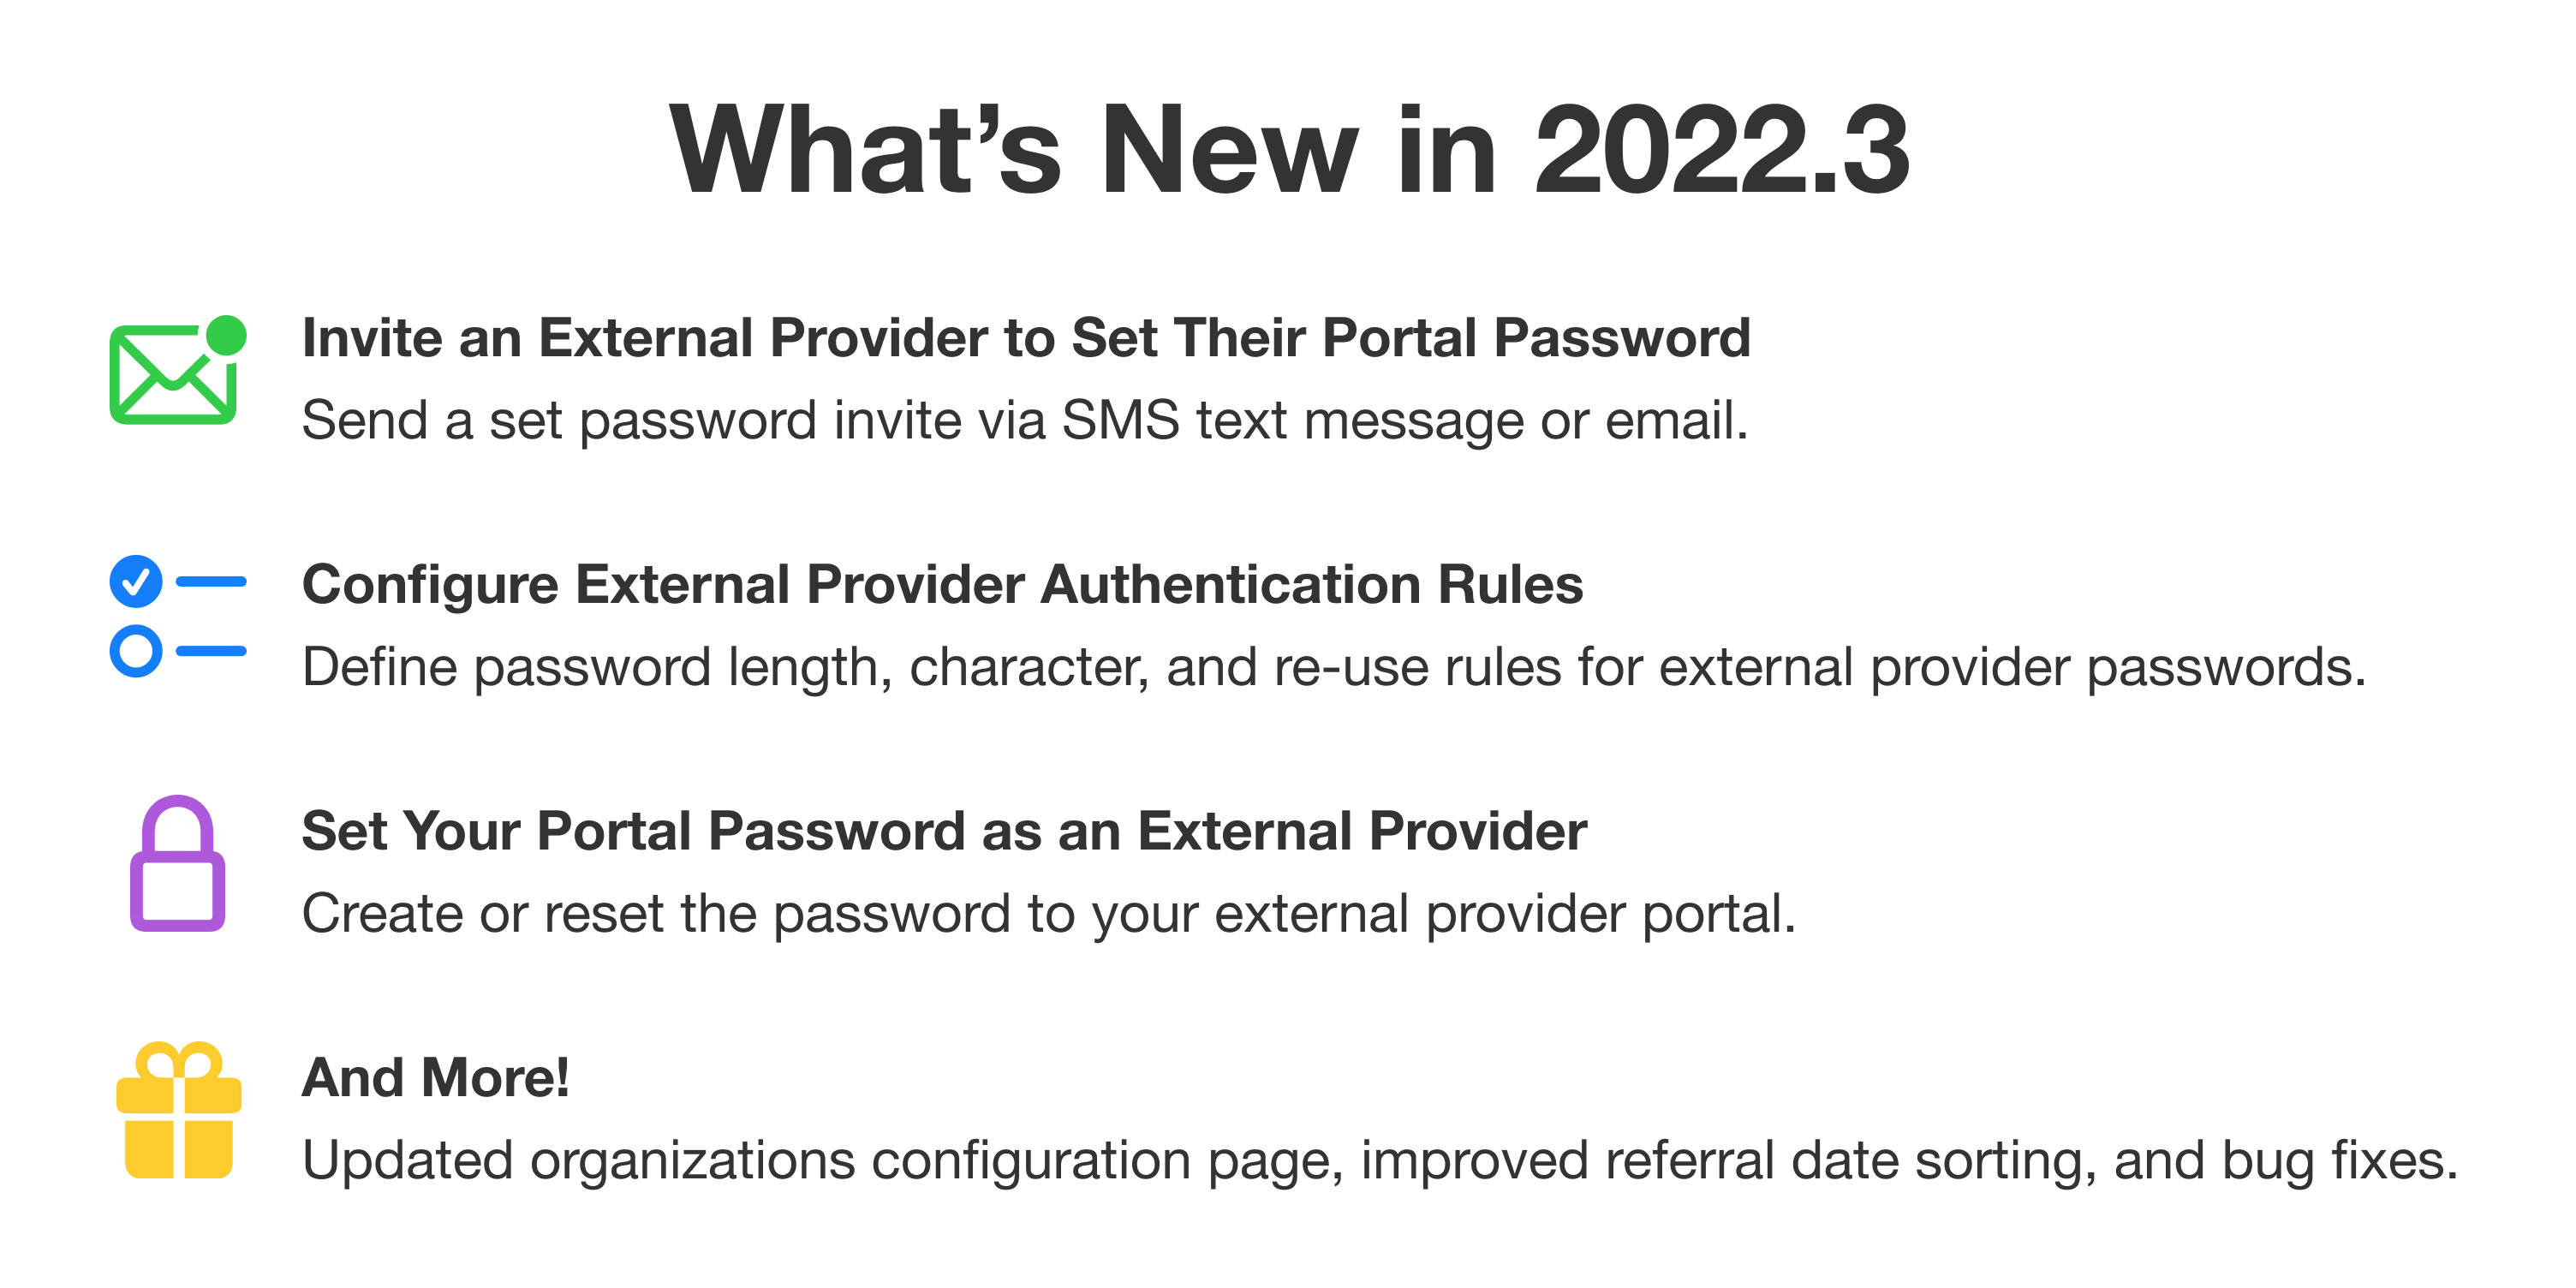 What's new in 2022.3. First: Invite an external provider to set their portal password. Send a set password invite via SMS text message or email. Second: Configure external provider authentication rules. Define password length, character, and re-use rules for external provider passwords. Third: Set your portal password as an external provider. Create or reset the password to your external provider portal. And more! Updated organizations configuration page, improved referral date sorting, and bug fixes.